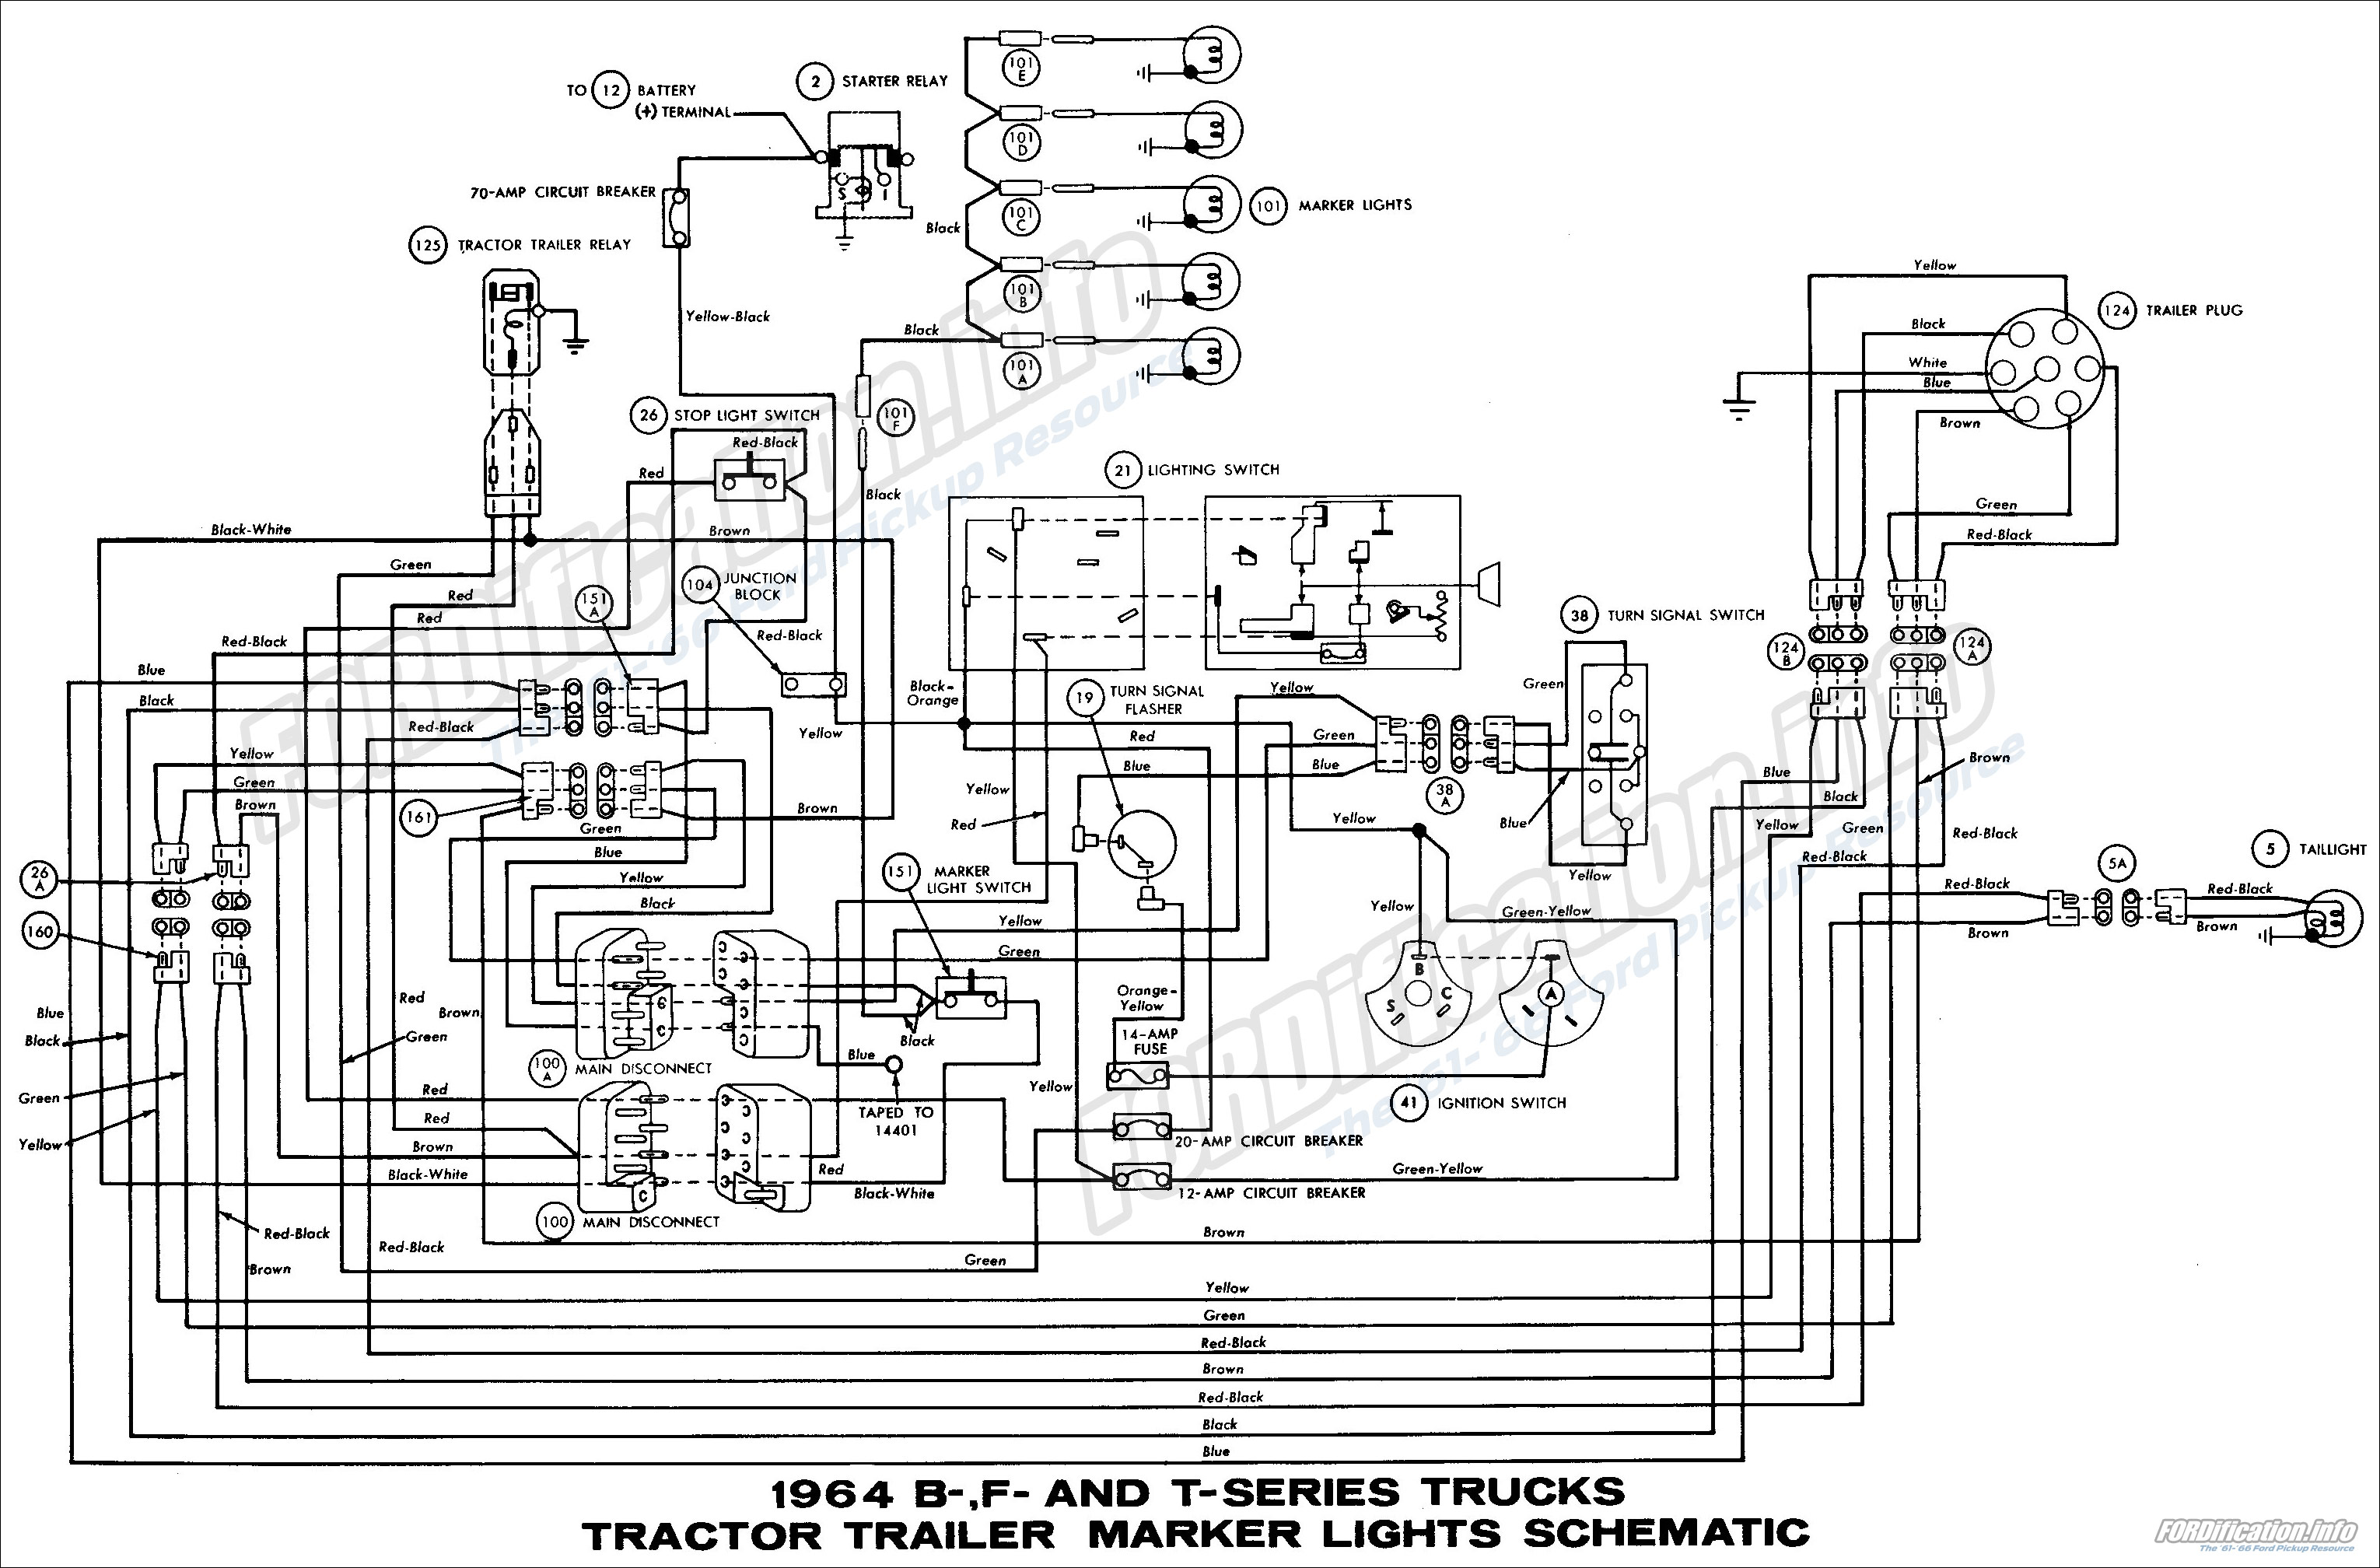 1964 Ford Truck Wiring Diagrams - FORDification.info - The '61-'66 Ford